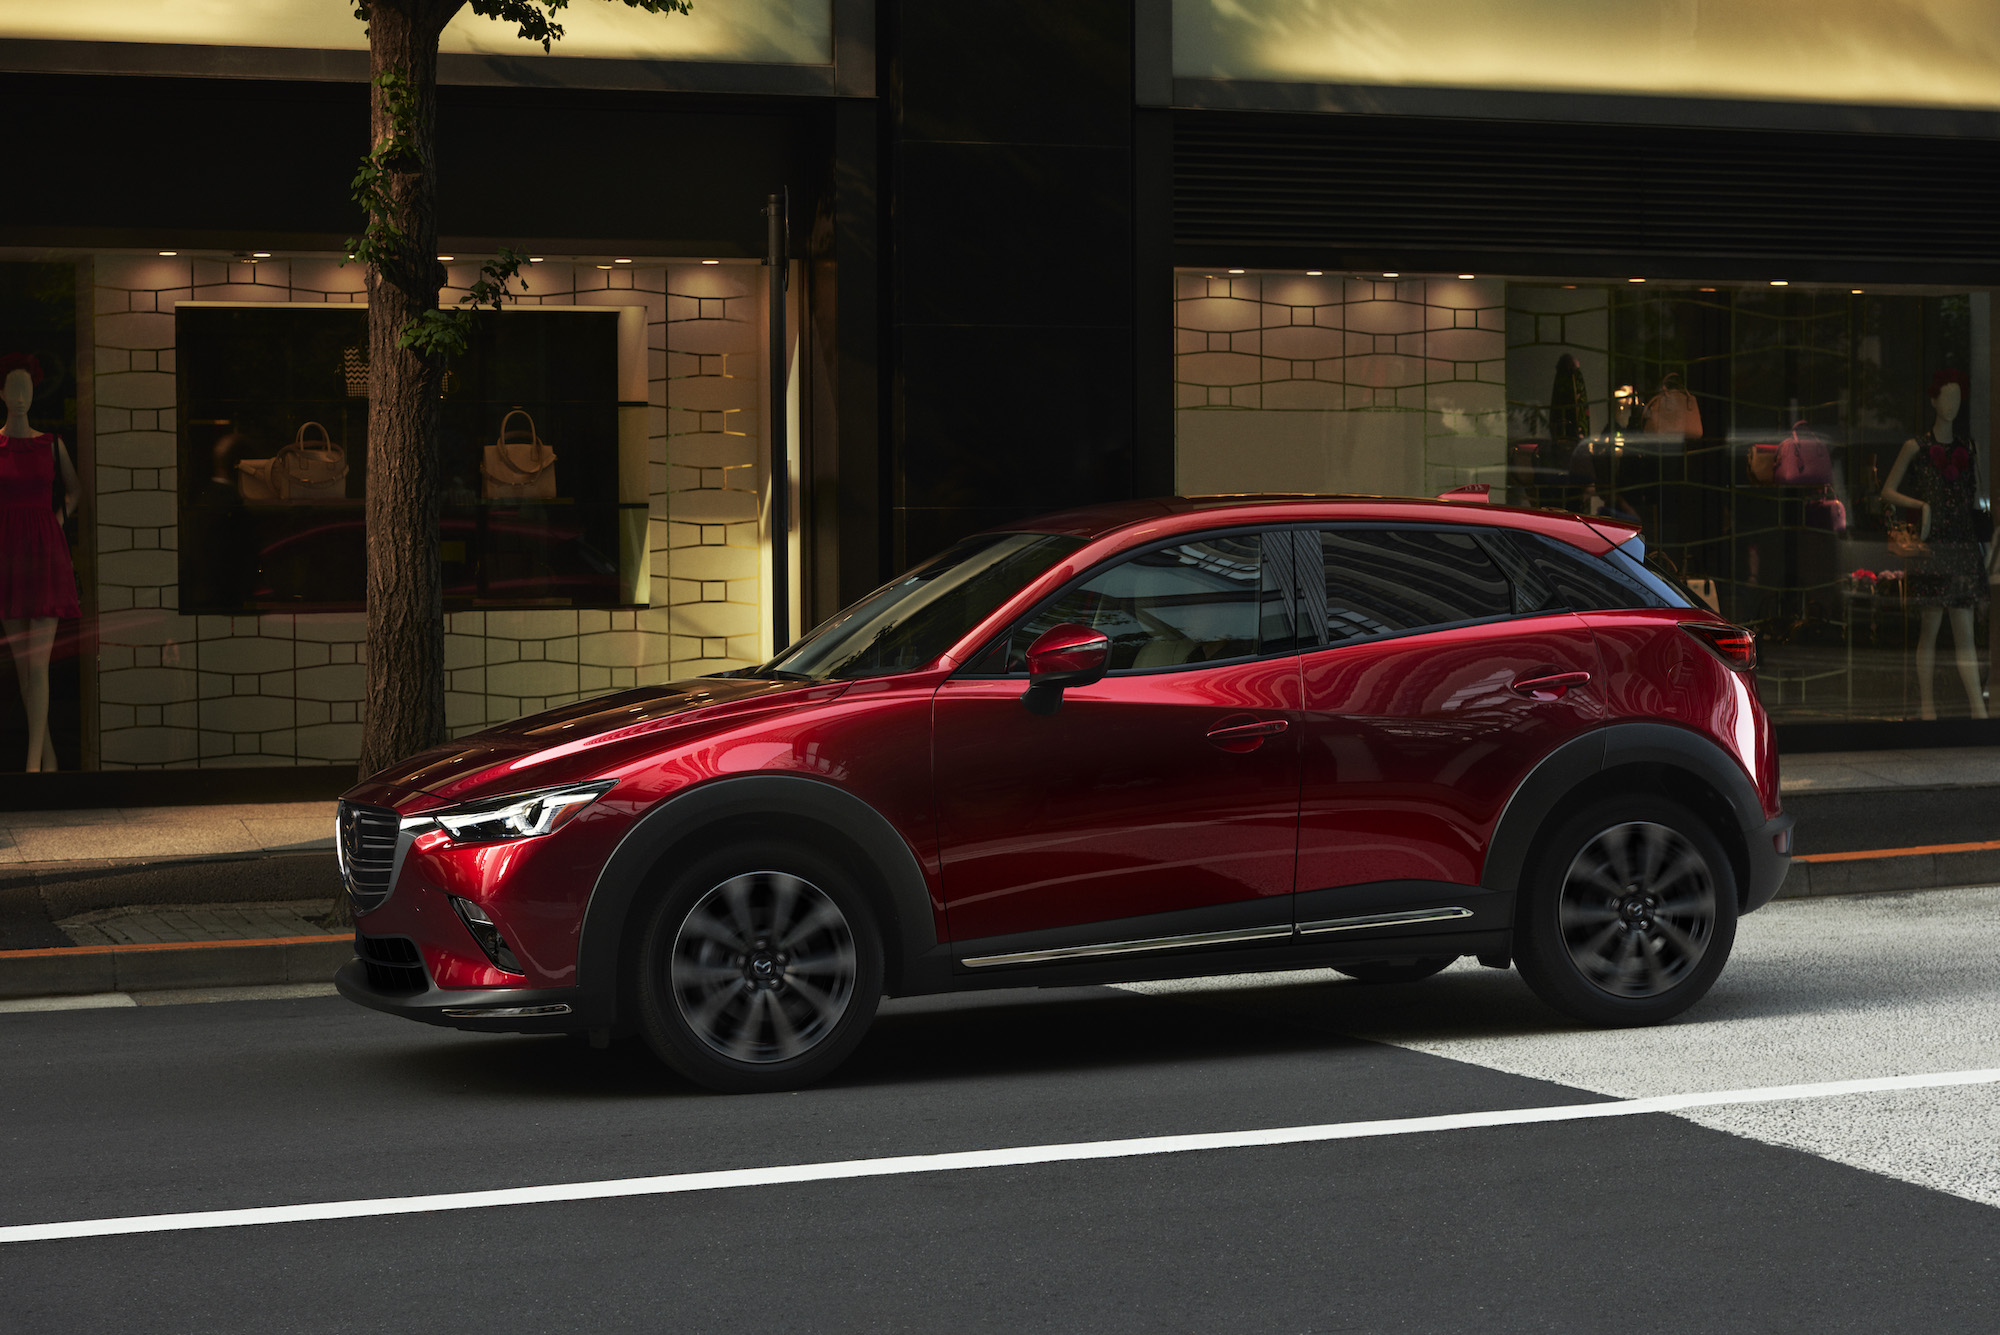 A metallic red 2019 Mazda CX-3 drives on a city street outside a storefront